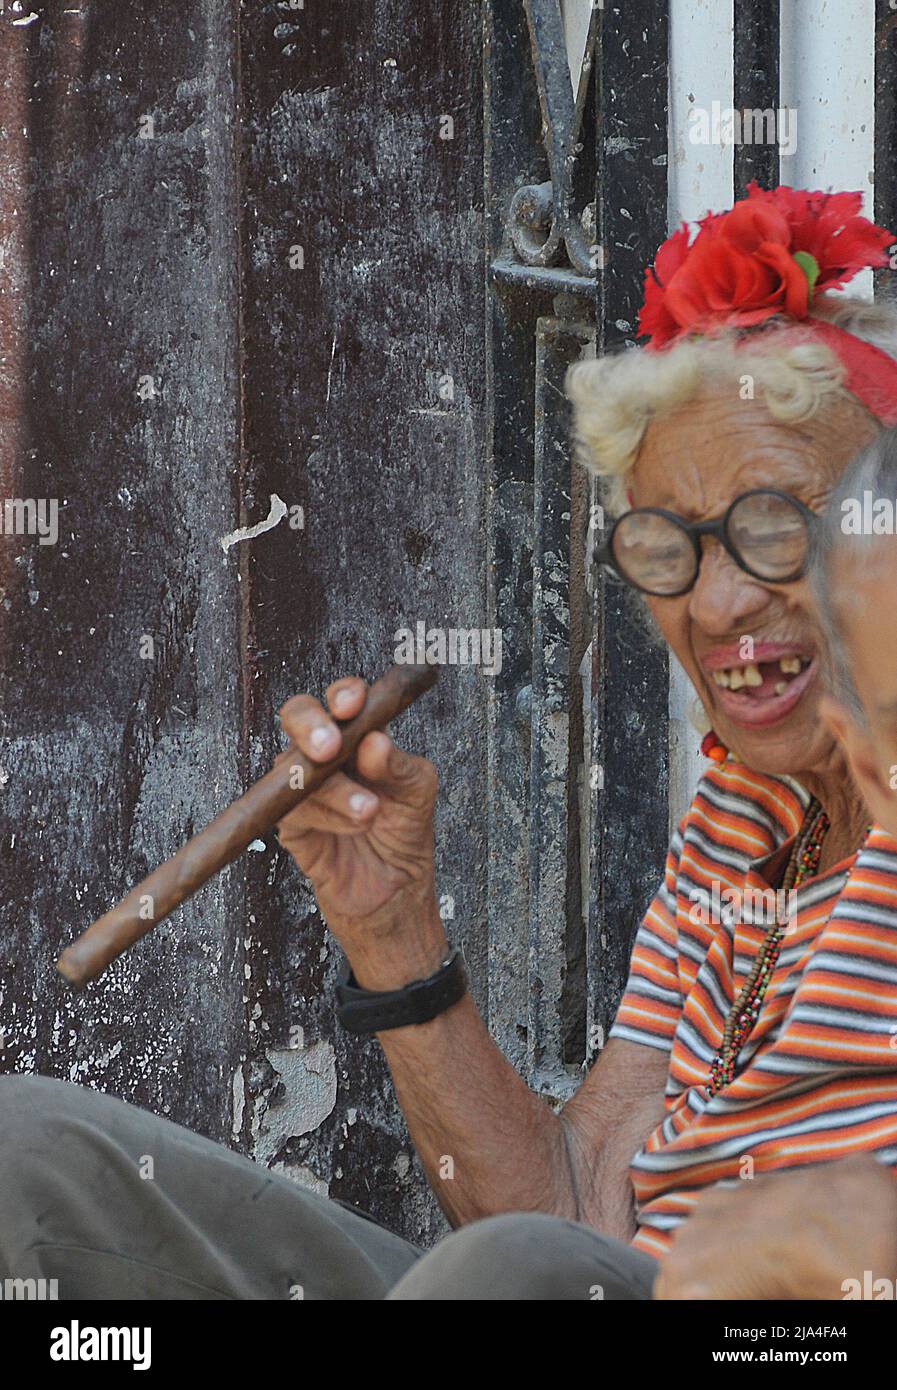 Old cuban woman with tooth gaps smoking a big cigar, Cathedral Plaza, historic old town of Havana, Cuba, Caribbean Stock Photo